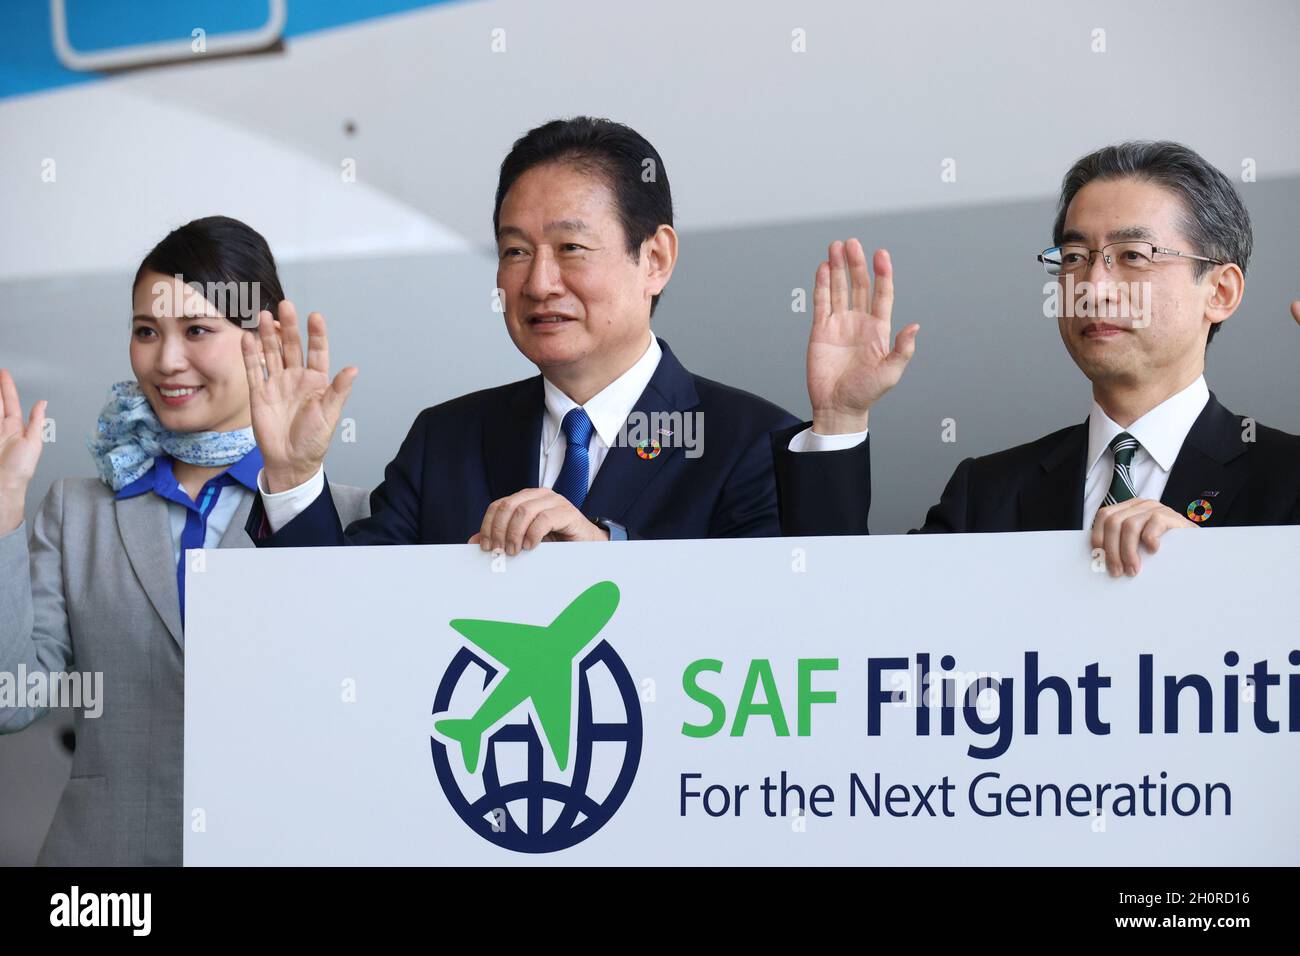 Tokyo, Japan. 14th Oct, 2021. Japan's largest air carrier All Nippon Airways (ANA) president Yuji Hirako (R) and executive vice president Shinichi Inoue (C) poses for photo as they will launch the new program of 'SAF Flight Initiative' to use sustainable aviation fuels (SAF) for their flights to support UNSDGs at the company's Hangar at the Haneda airport in Tokyo on Thursday, October 14, 2021. ANA and Japan Airlines (JAL) announced a joint report 'Toward Virtually Zero CO2 Emissions from Air Transport in 2050' last week as they will work with the government and logistics companies to promo Stock Photo